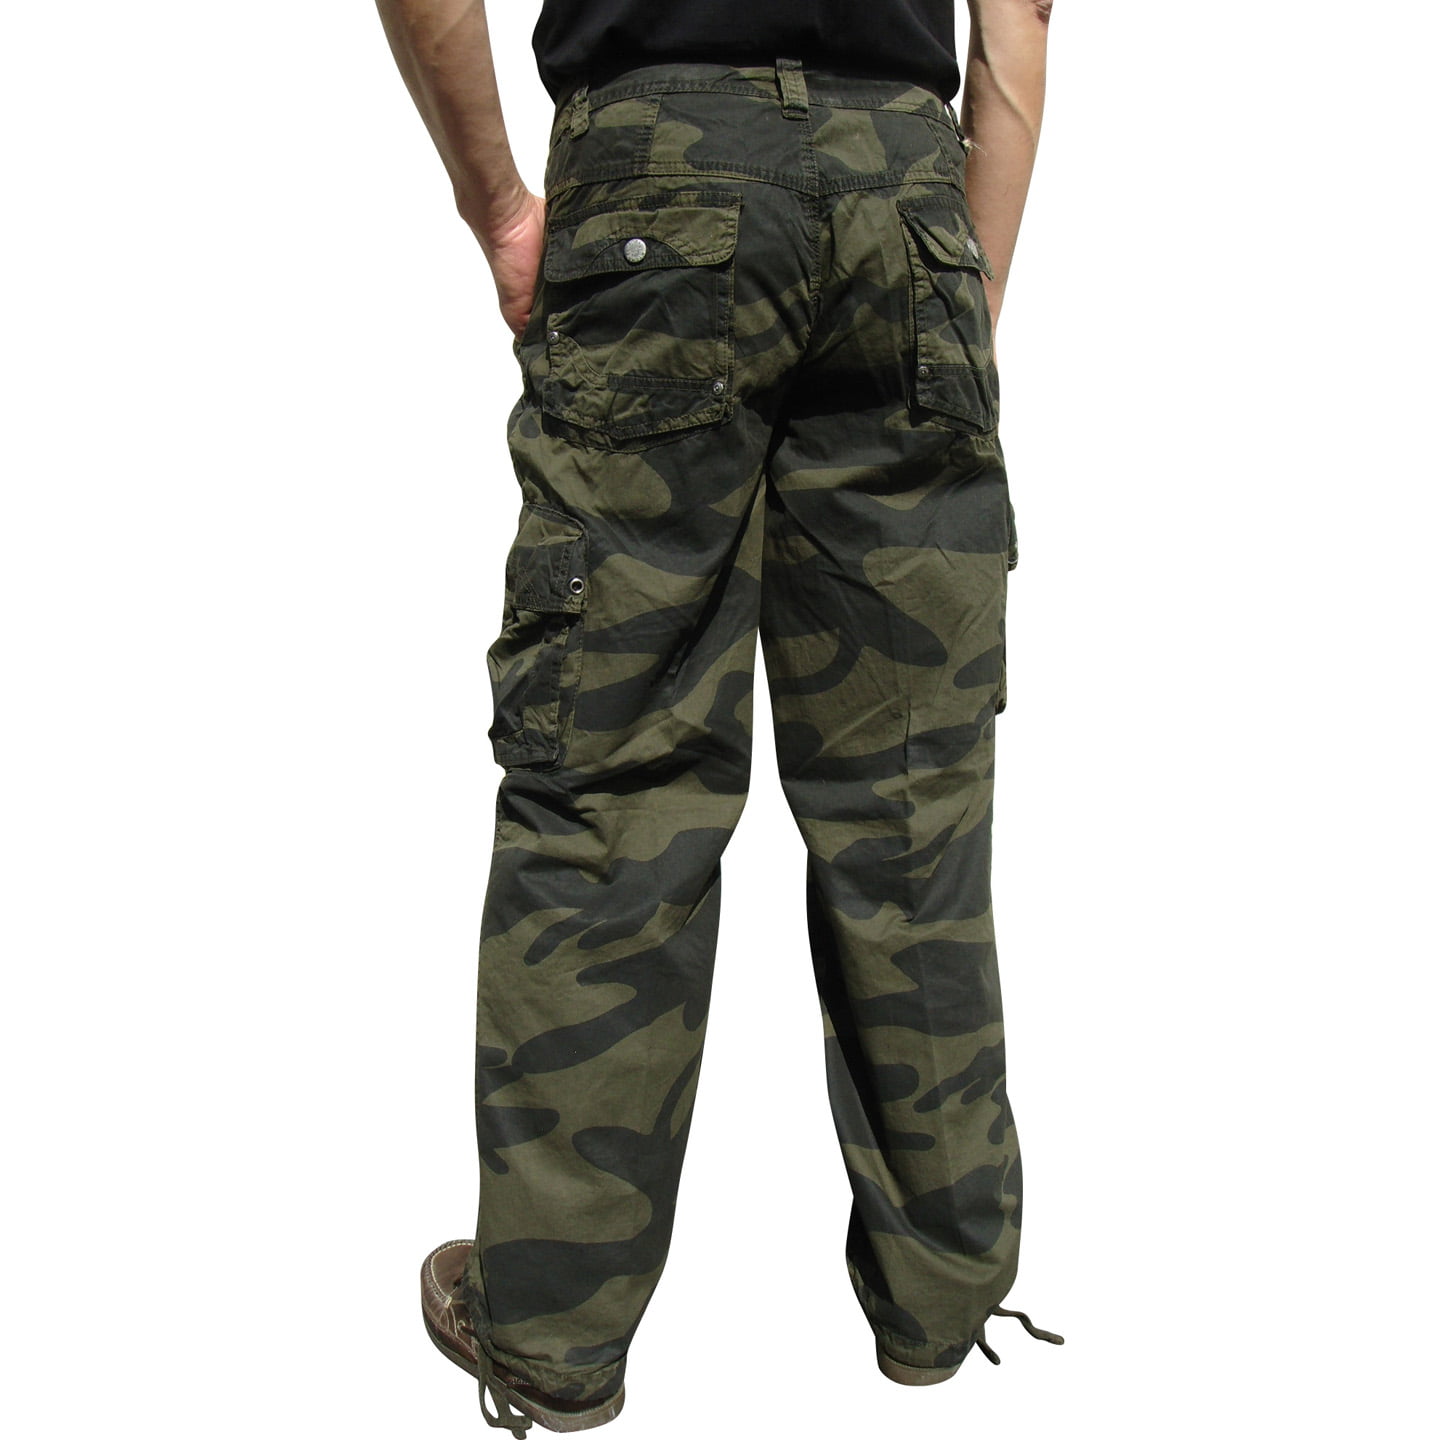 Cotton Printed Mens Military Cargo Pant